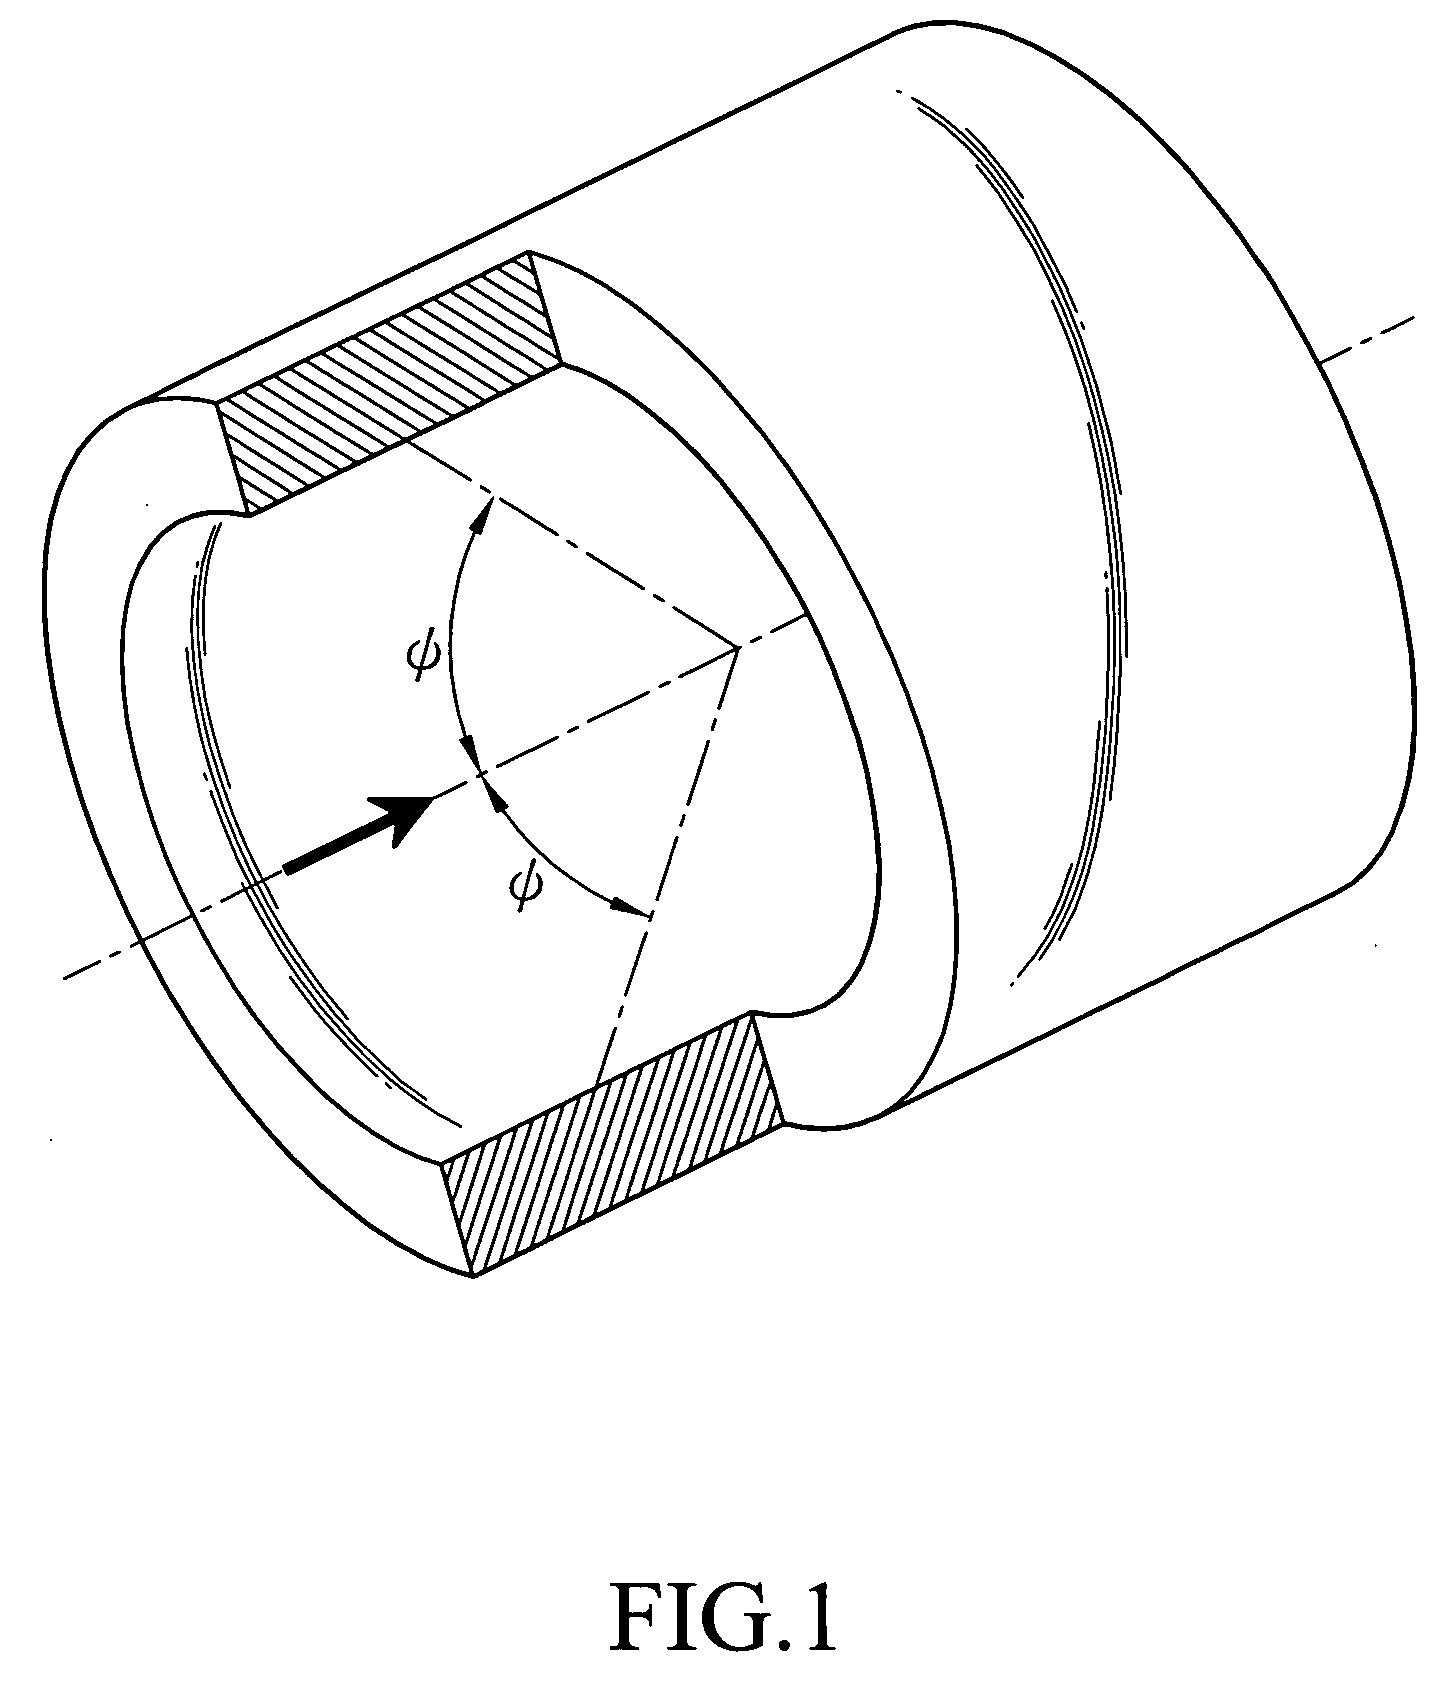 Process of fabricating a laminated hollow composite cylinder with an arranged ply angle